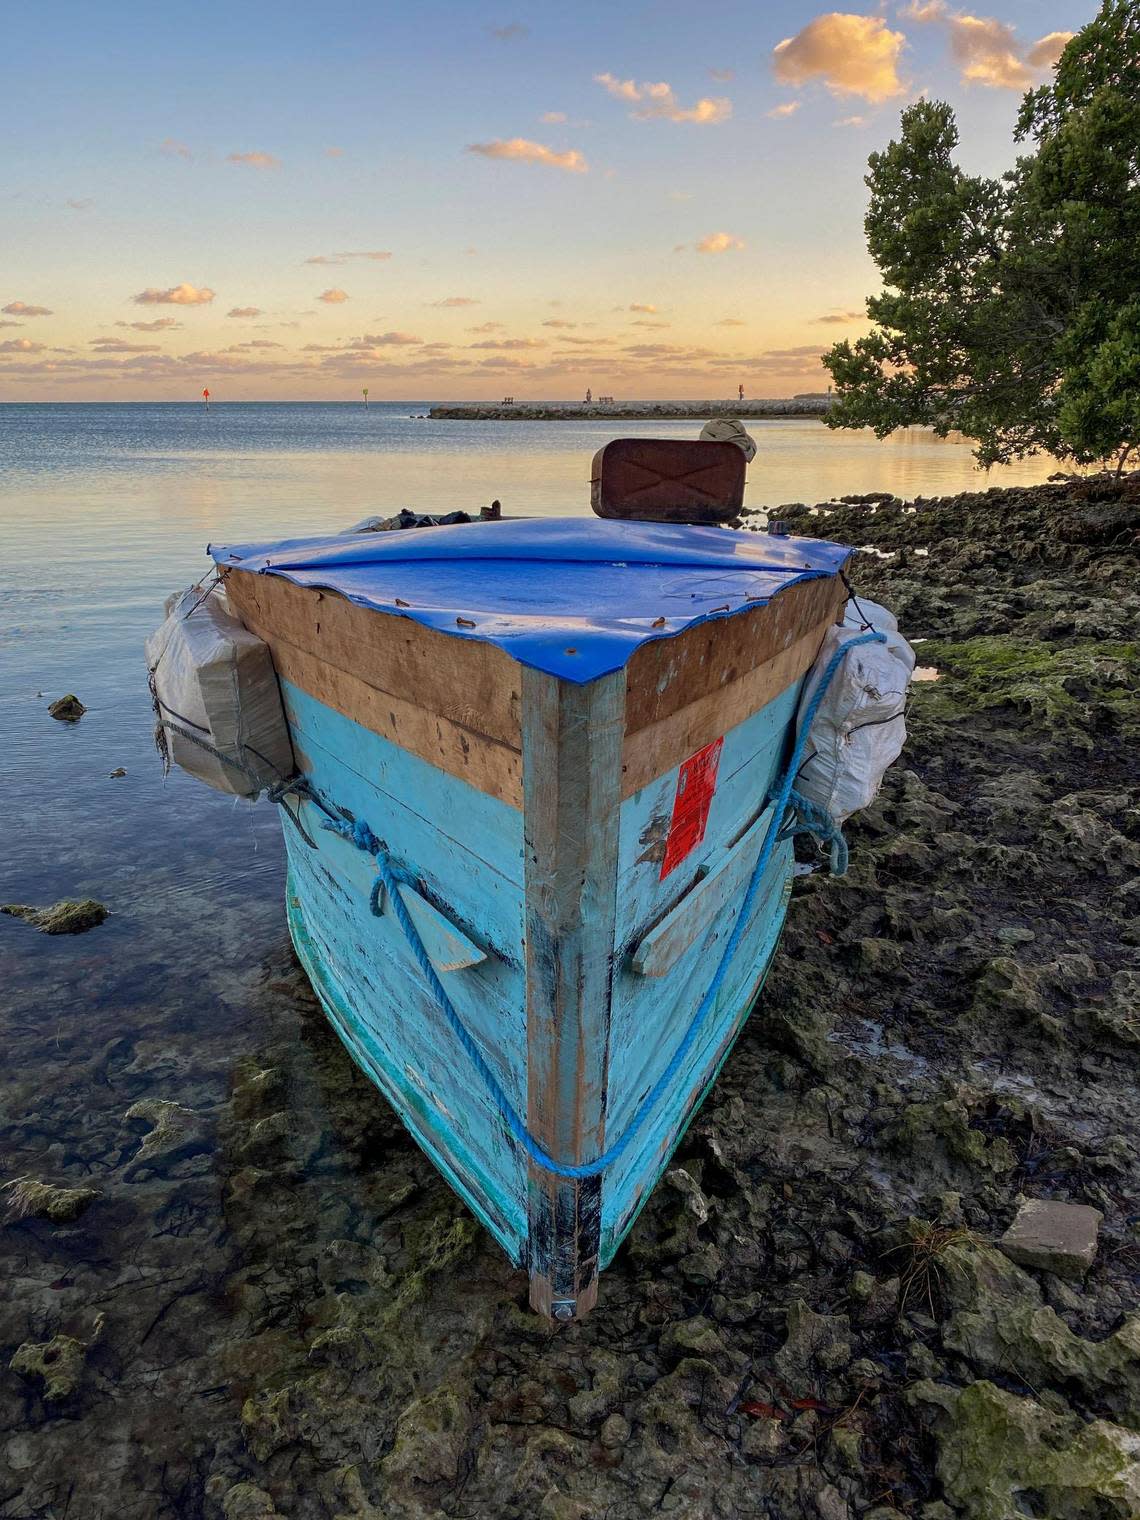 A boat used by Cuban migrants to reach the United States sits offshore at Harry Harris Park in Tavernier in the Florida Keys on Jan. 14, 2023.